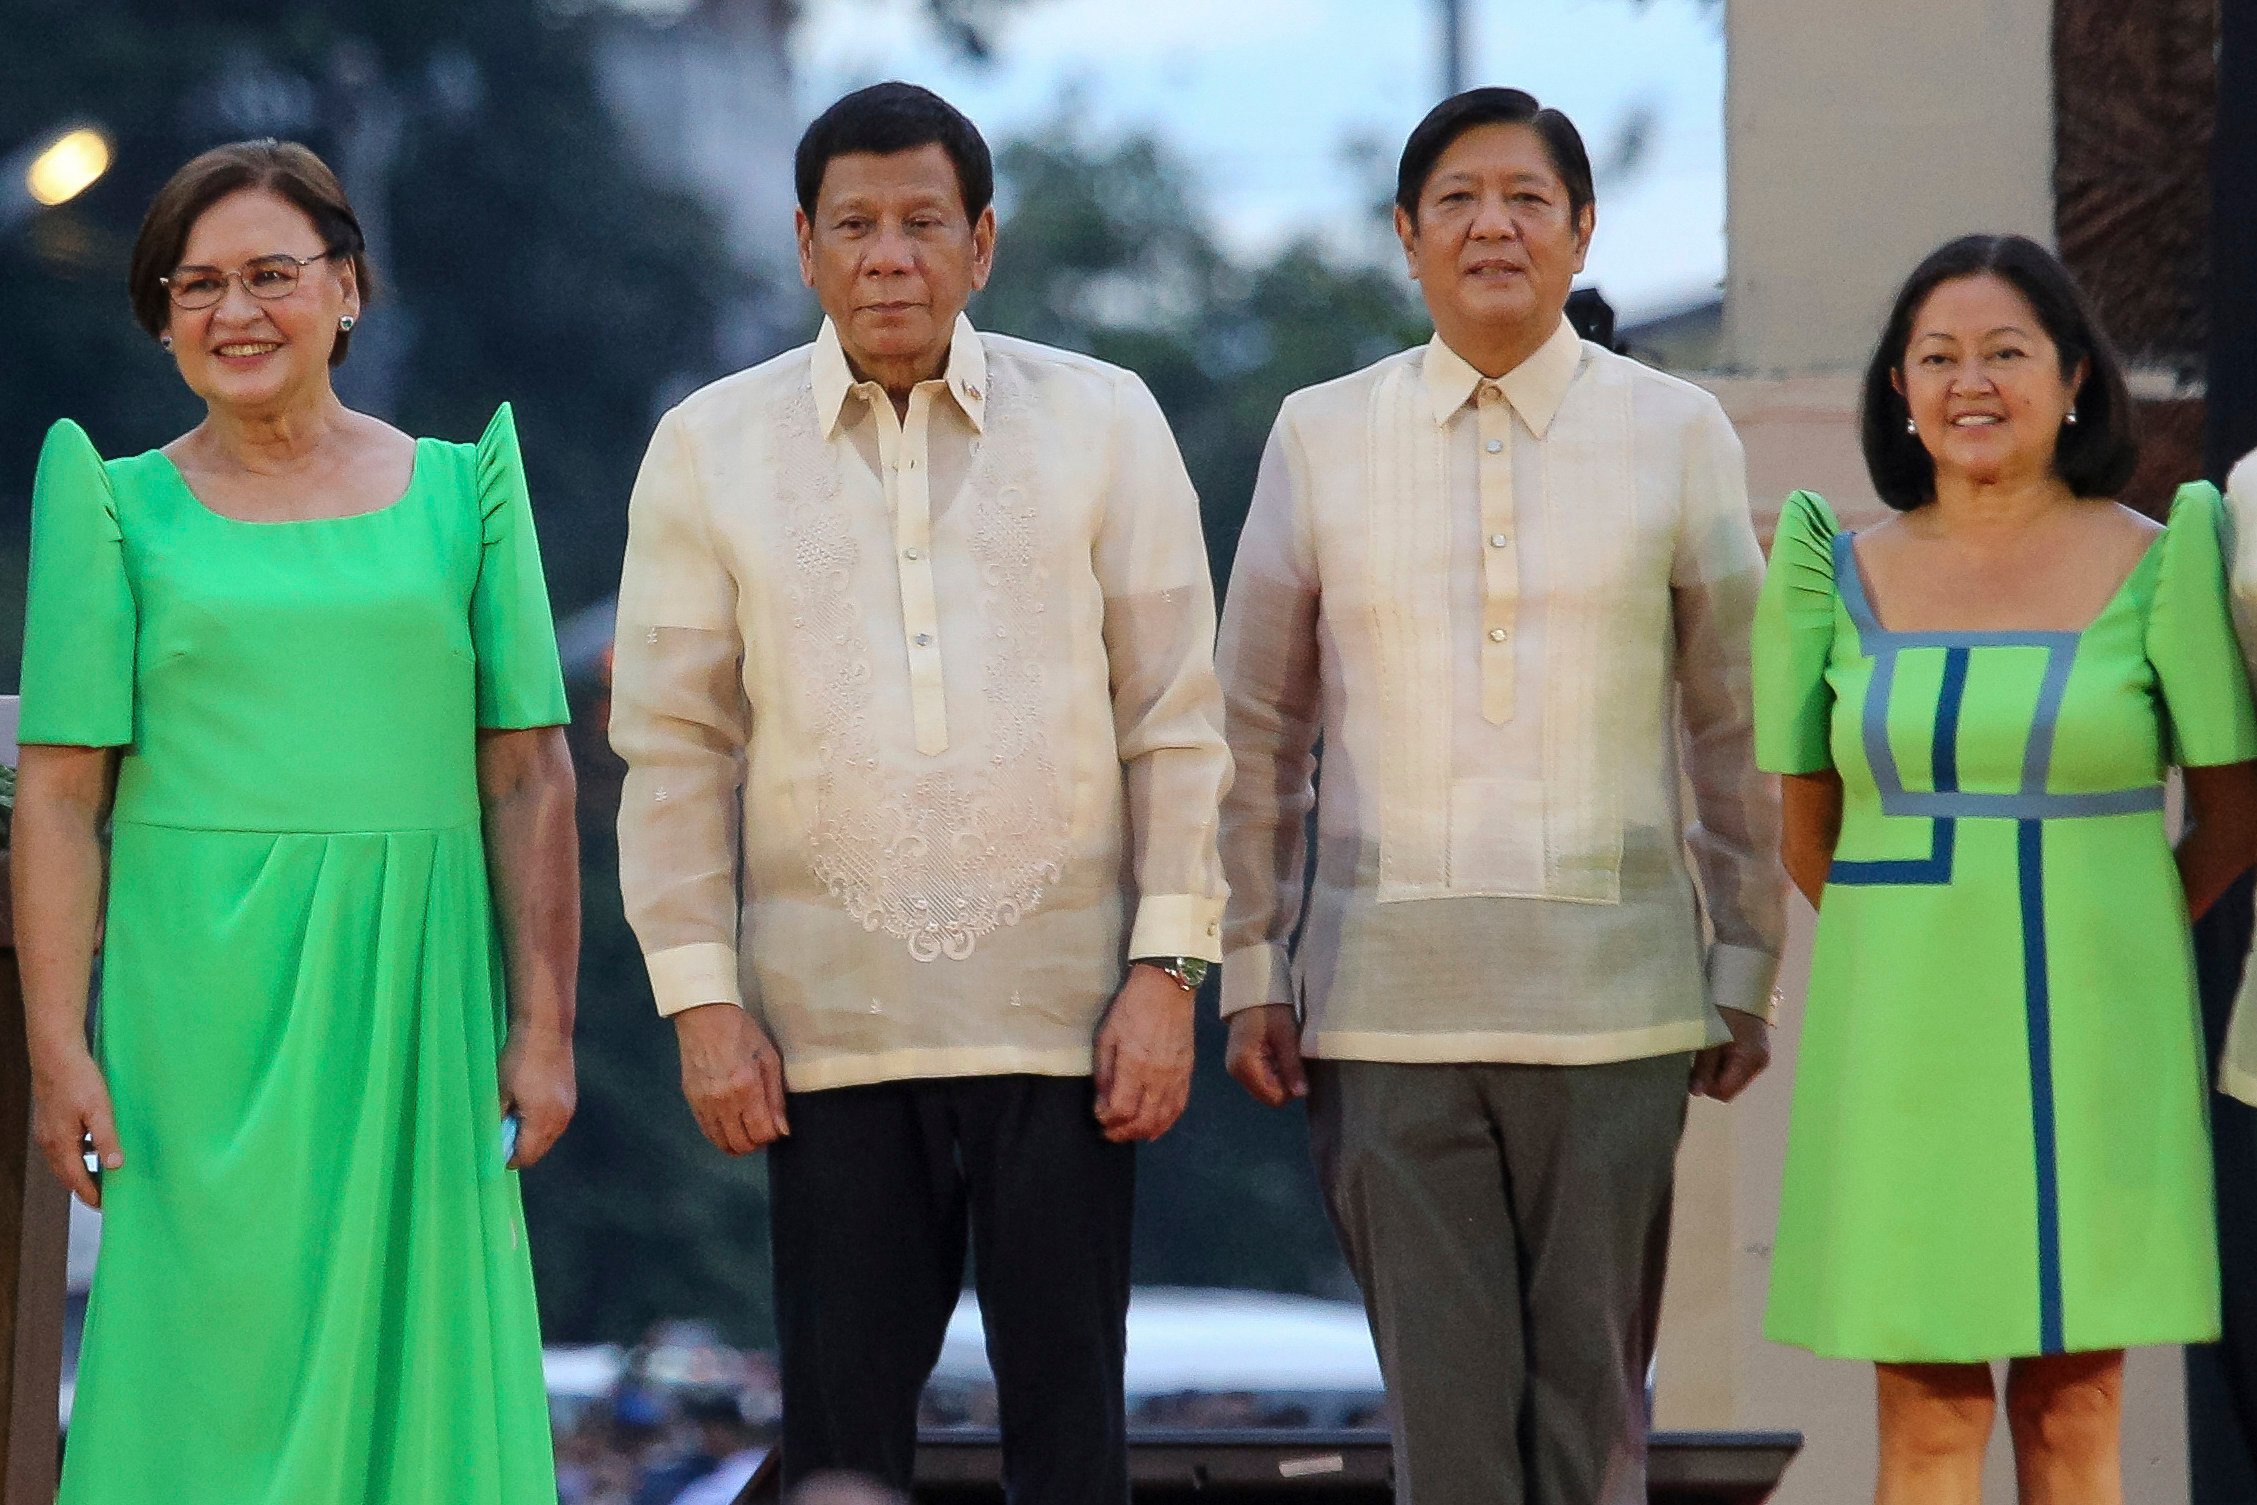 Rodrigo Duterte (second from left) stands besides President Ferdinand Marcos Jnr (second from right) as they attend the oath taking rites of Vice-President elect Sara Duterte in Davao city on June 19, 2022. Photo: AP